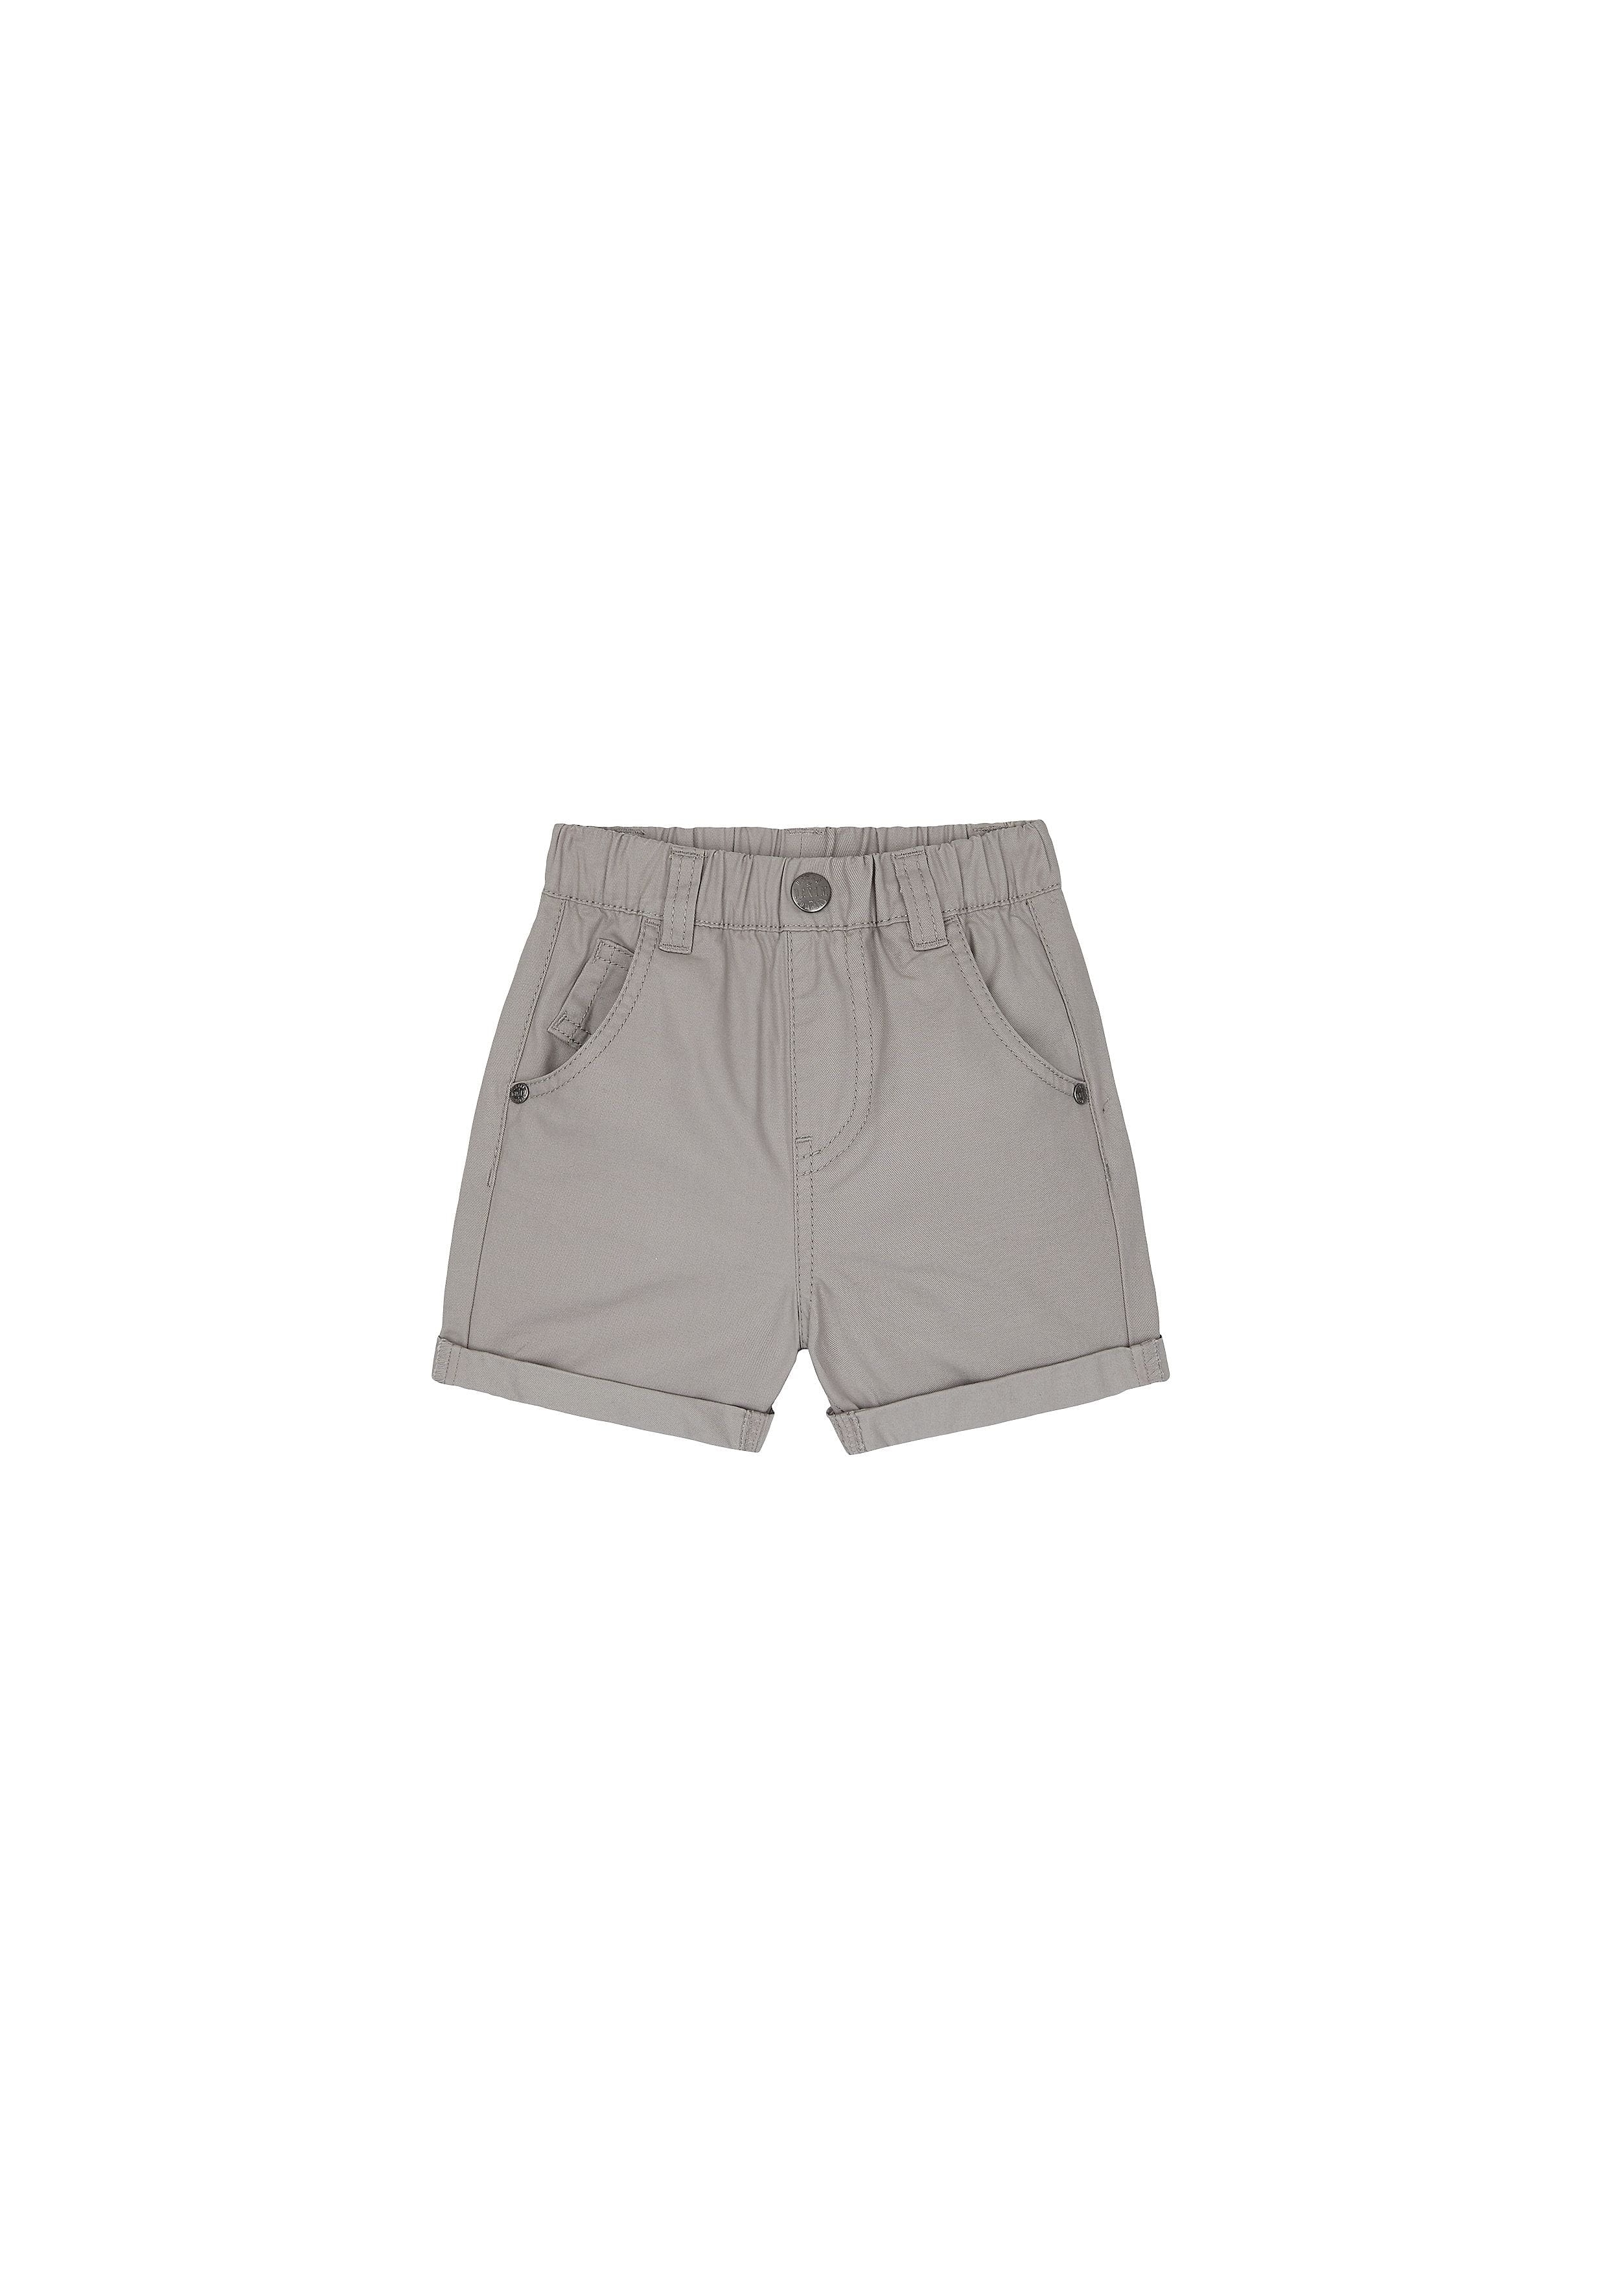 Boys Shorts Embroidered - Grey